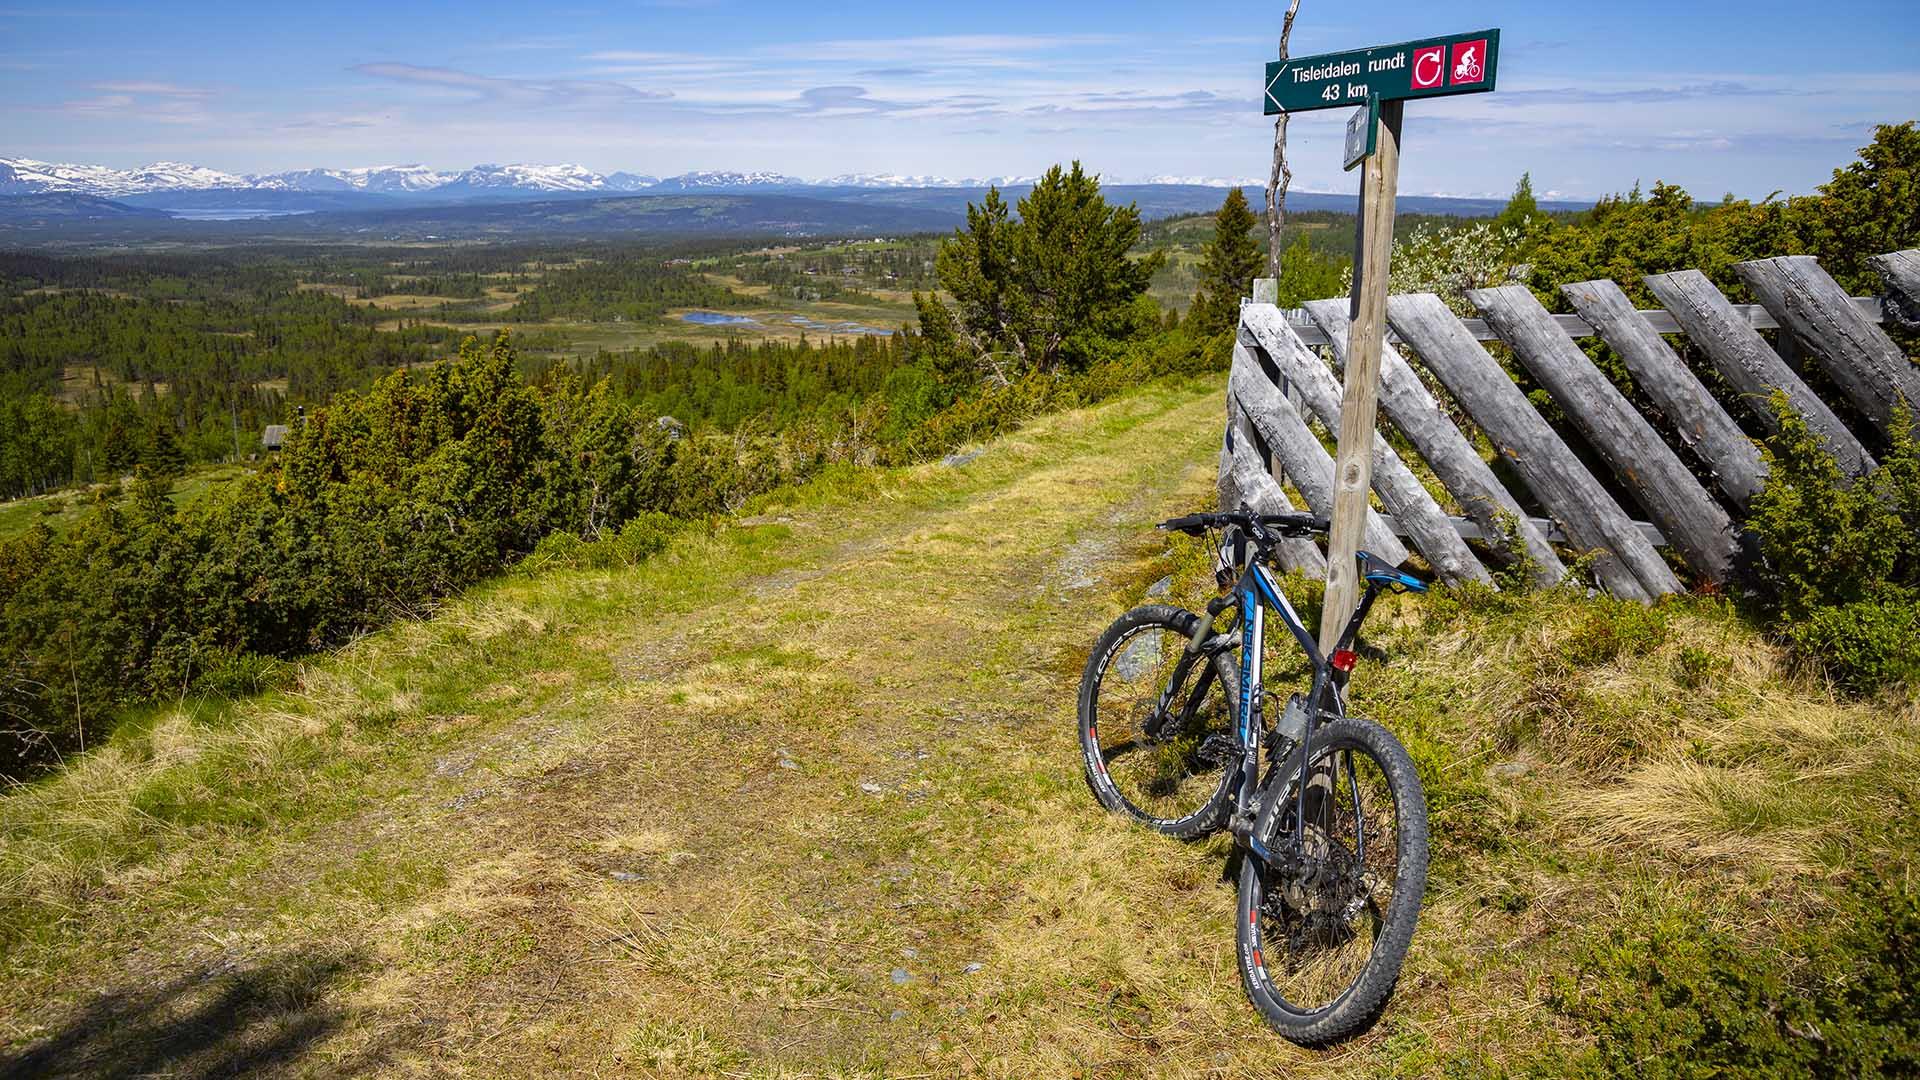 A broad grass trail leads past a wooden fence in open mountain farming country with juniper bushes and high mountains at the far horizon. A bicycle is put against a signpost that shows the way.